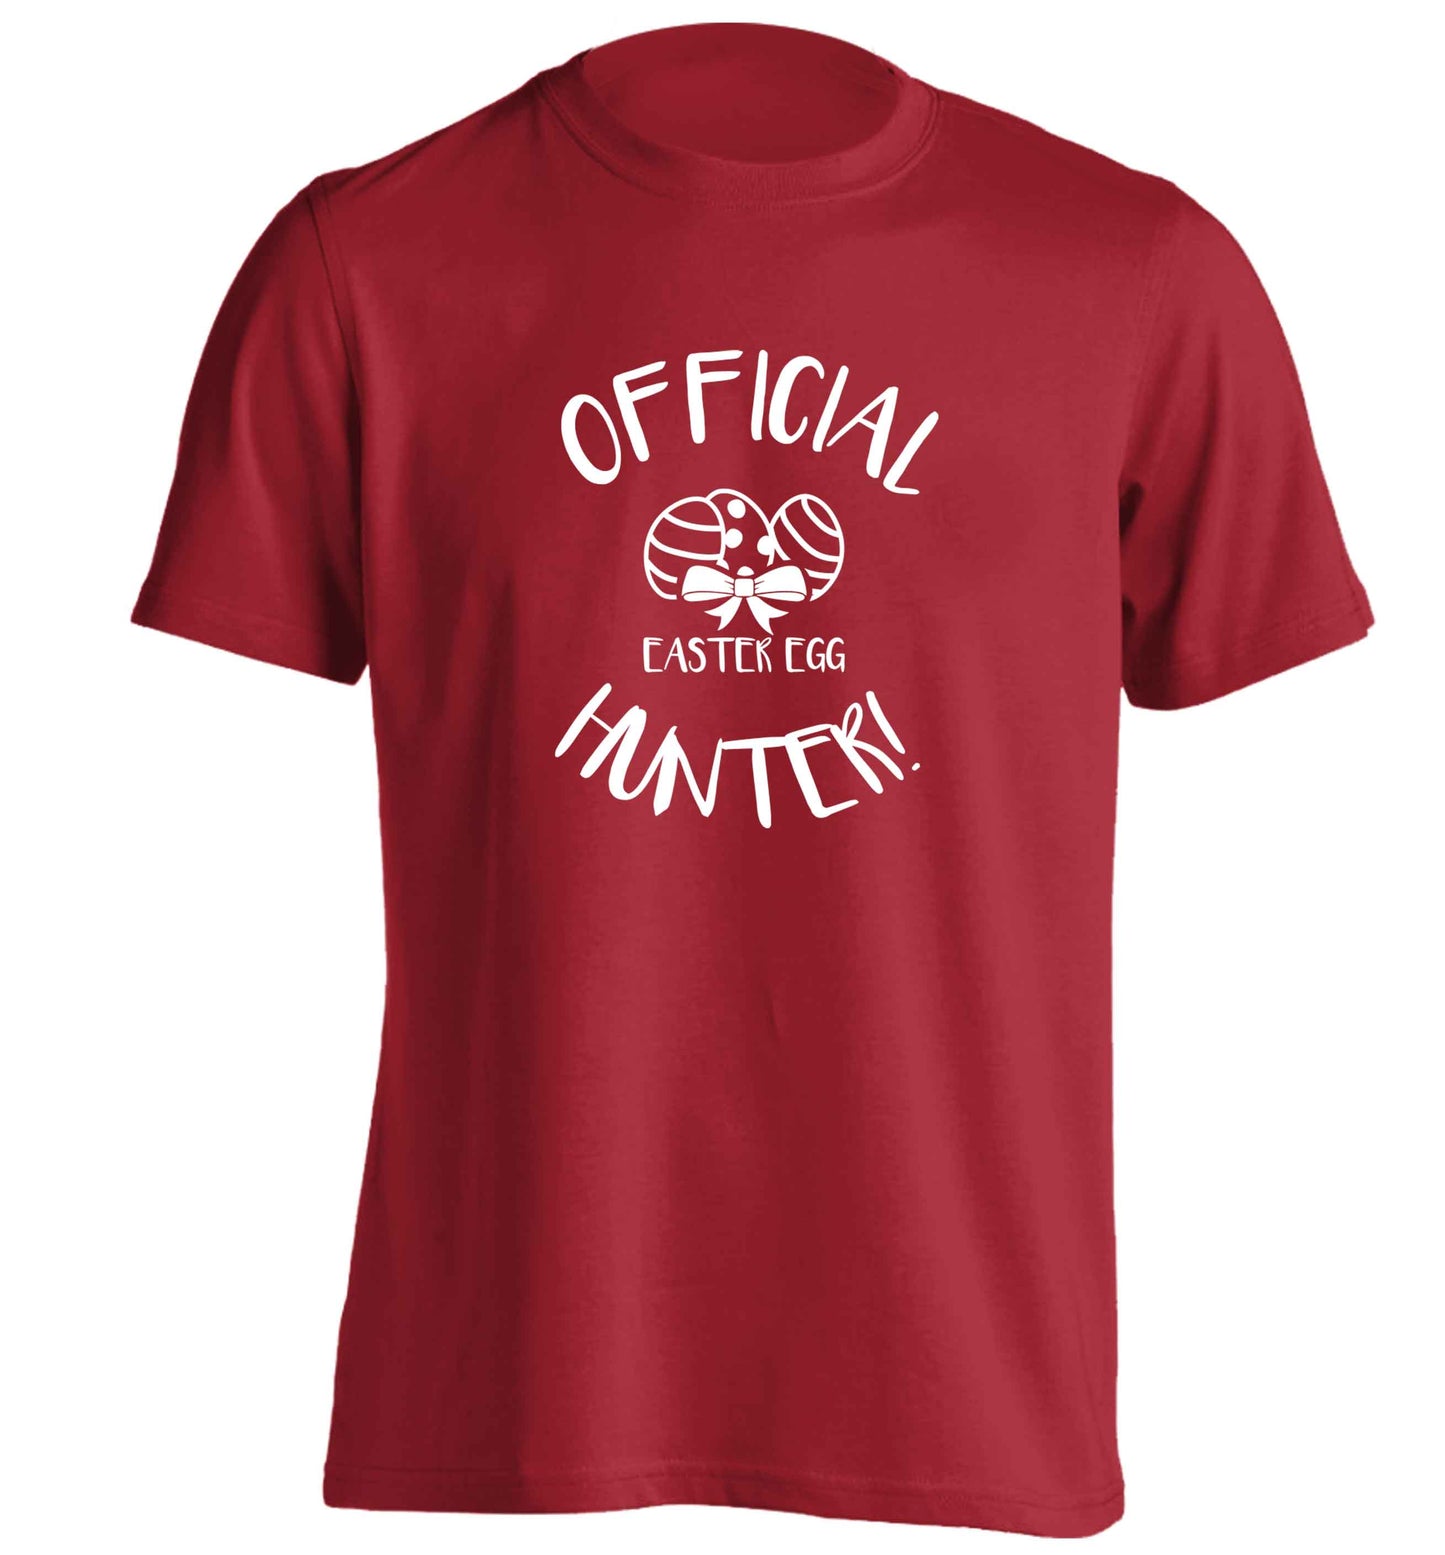 Official Easter egg hunter! adults unisex red Tshirt 2XL